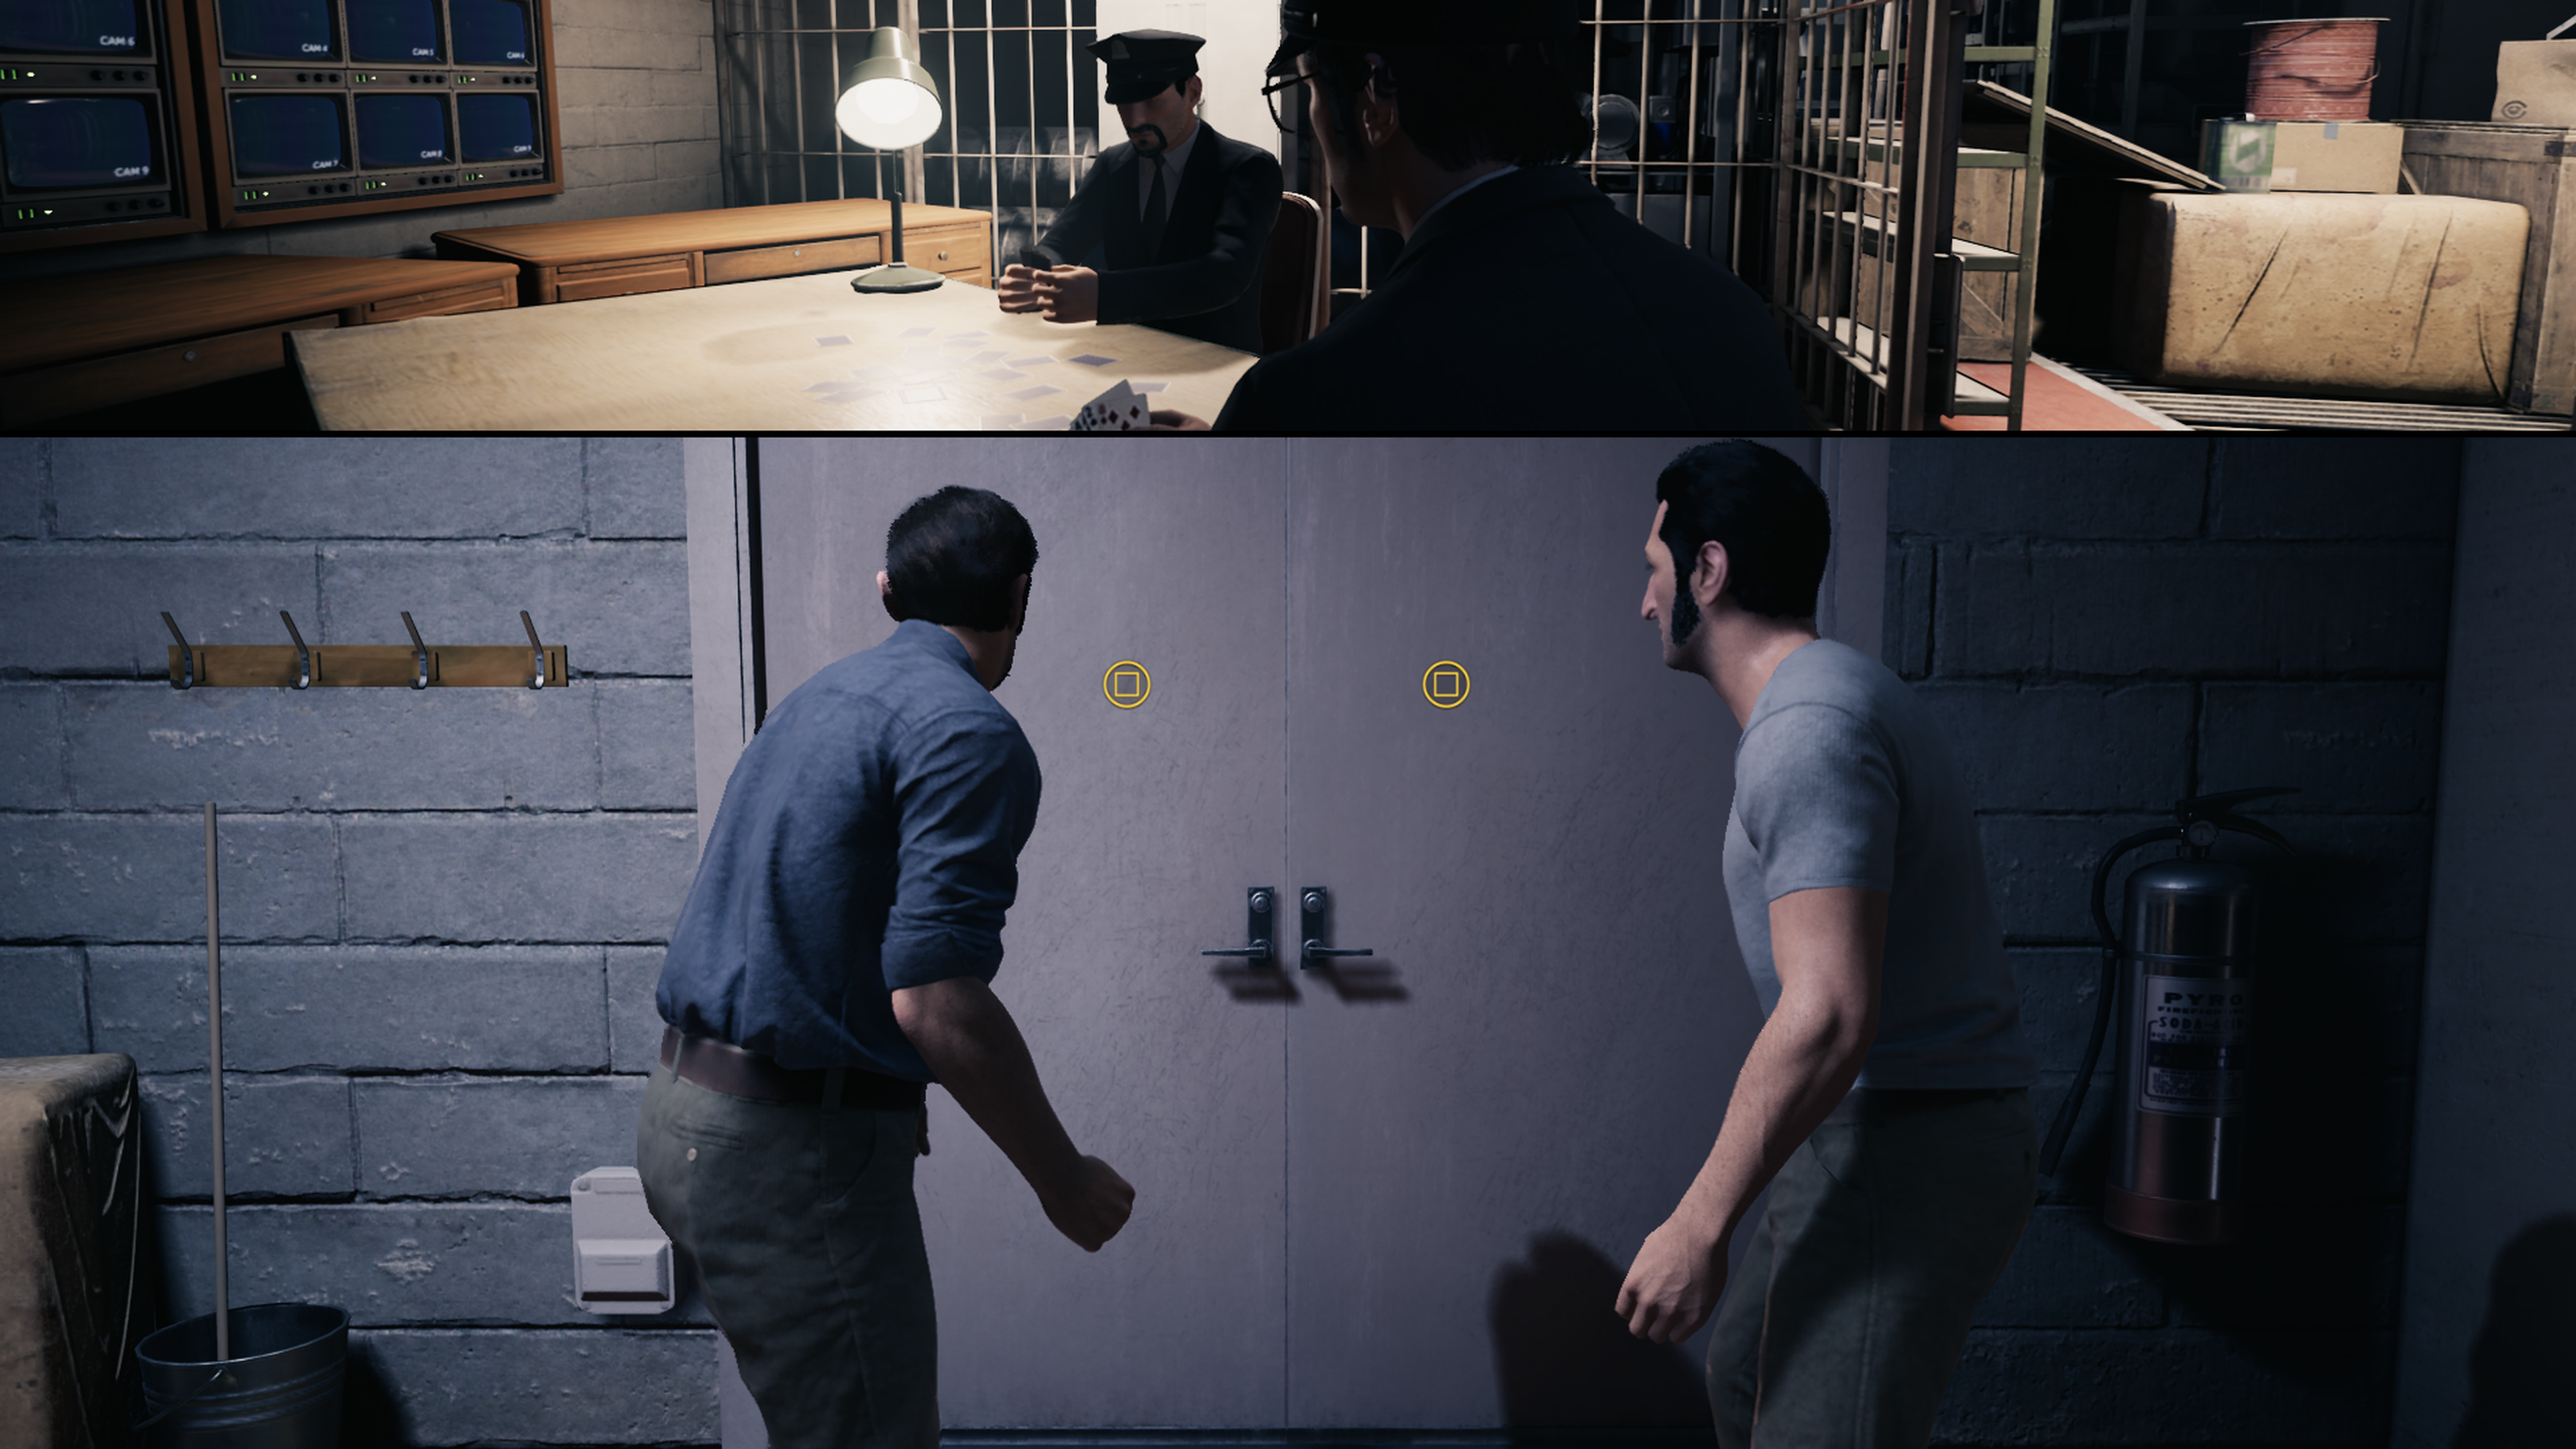 A way out game. Way out игра. Побег из тюрьмы a way out. A way out Лео. A way out (2018).